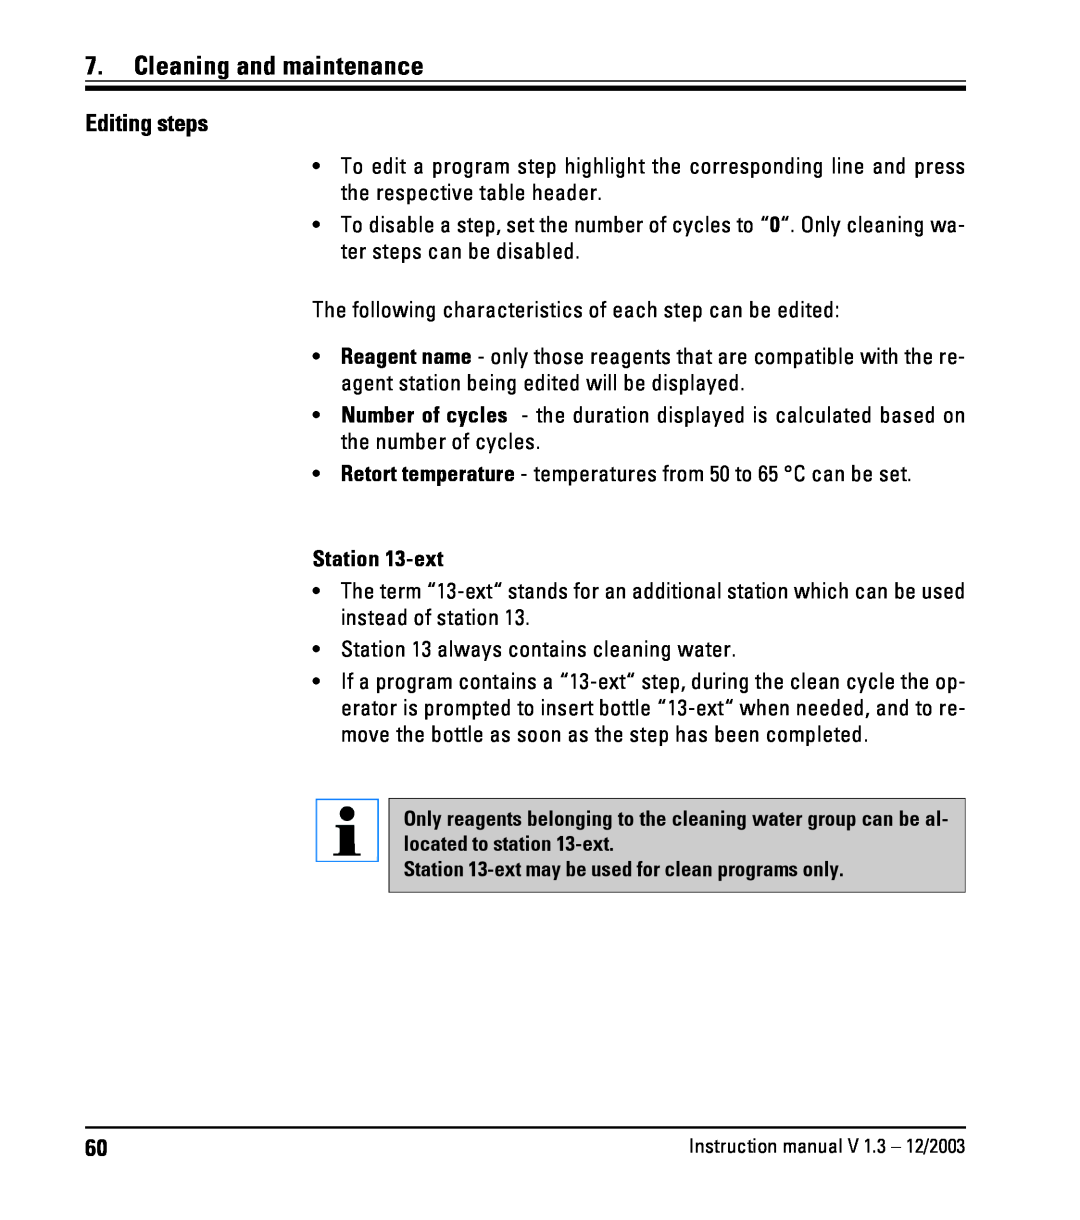 Leica ASP300 instruction manual Editing steps, Cleaning and maintenance 